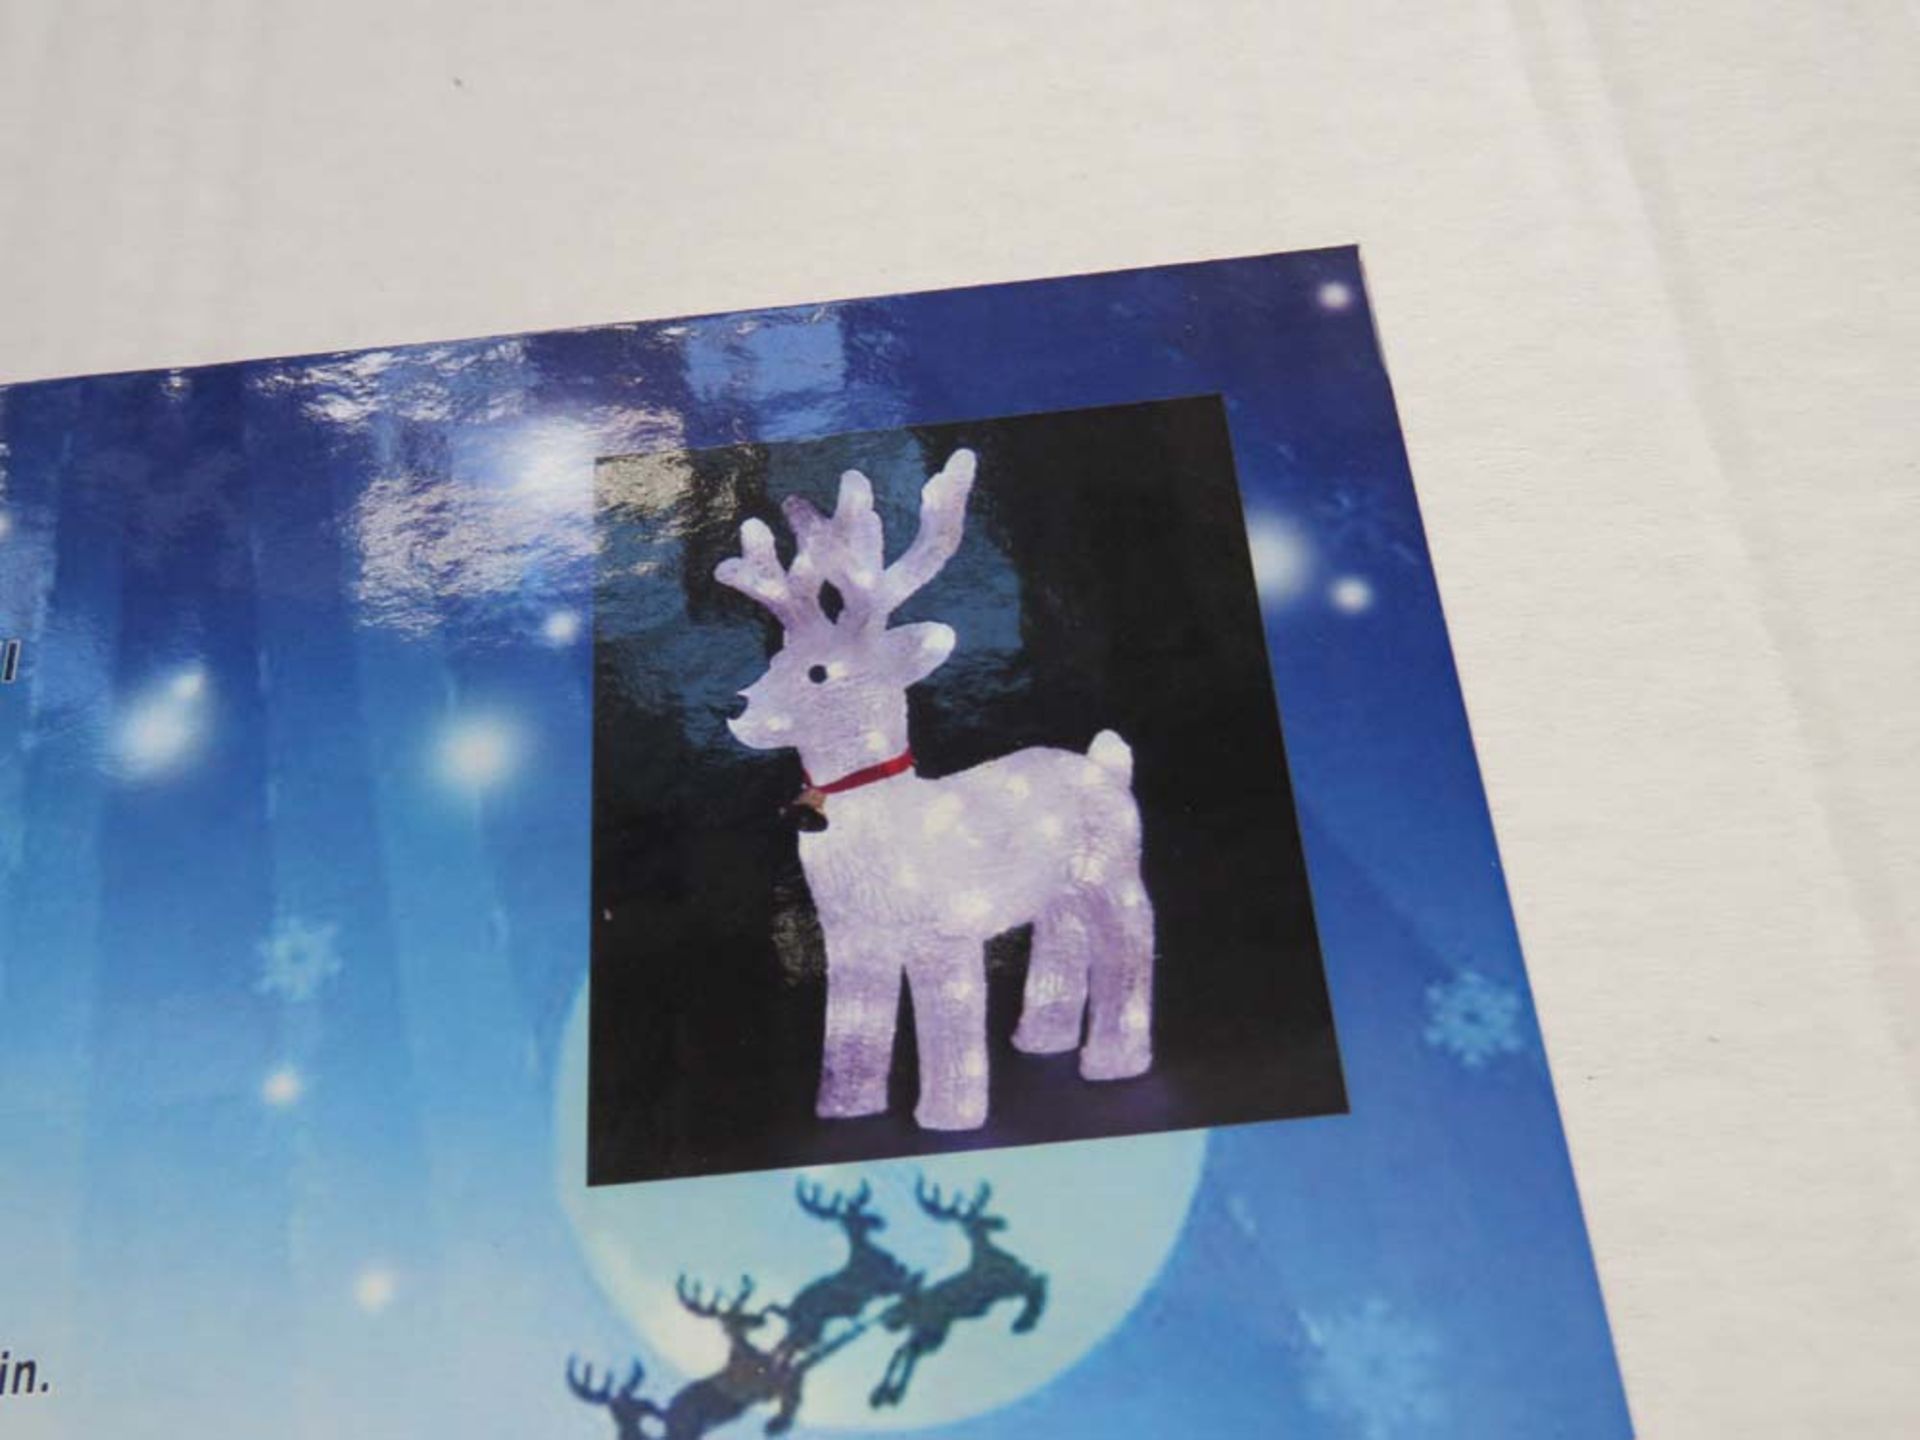 Lot containing a melted edge candle, a small Christmas projector and a 45cm acrylic rocking horse - Image 3 of 3